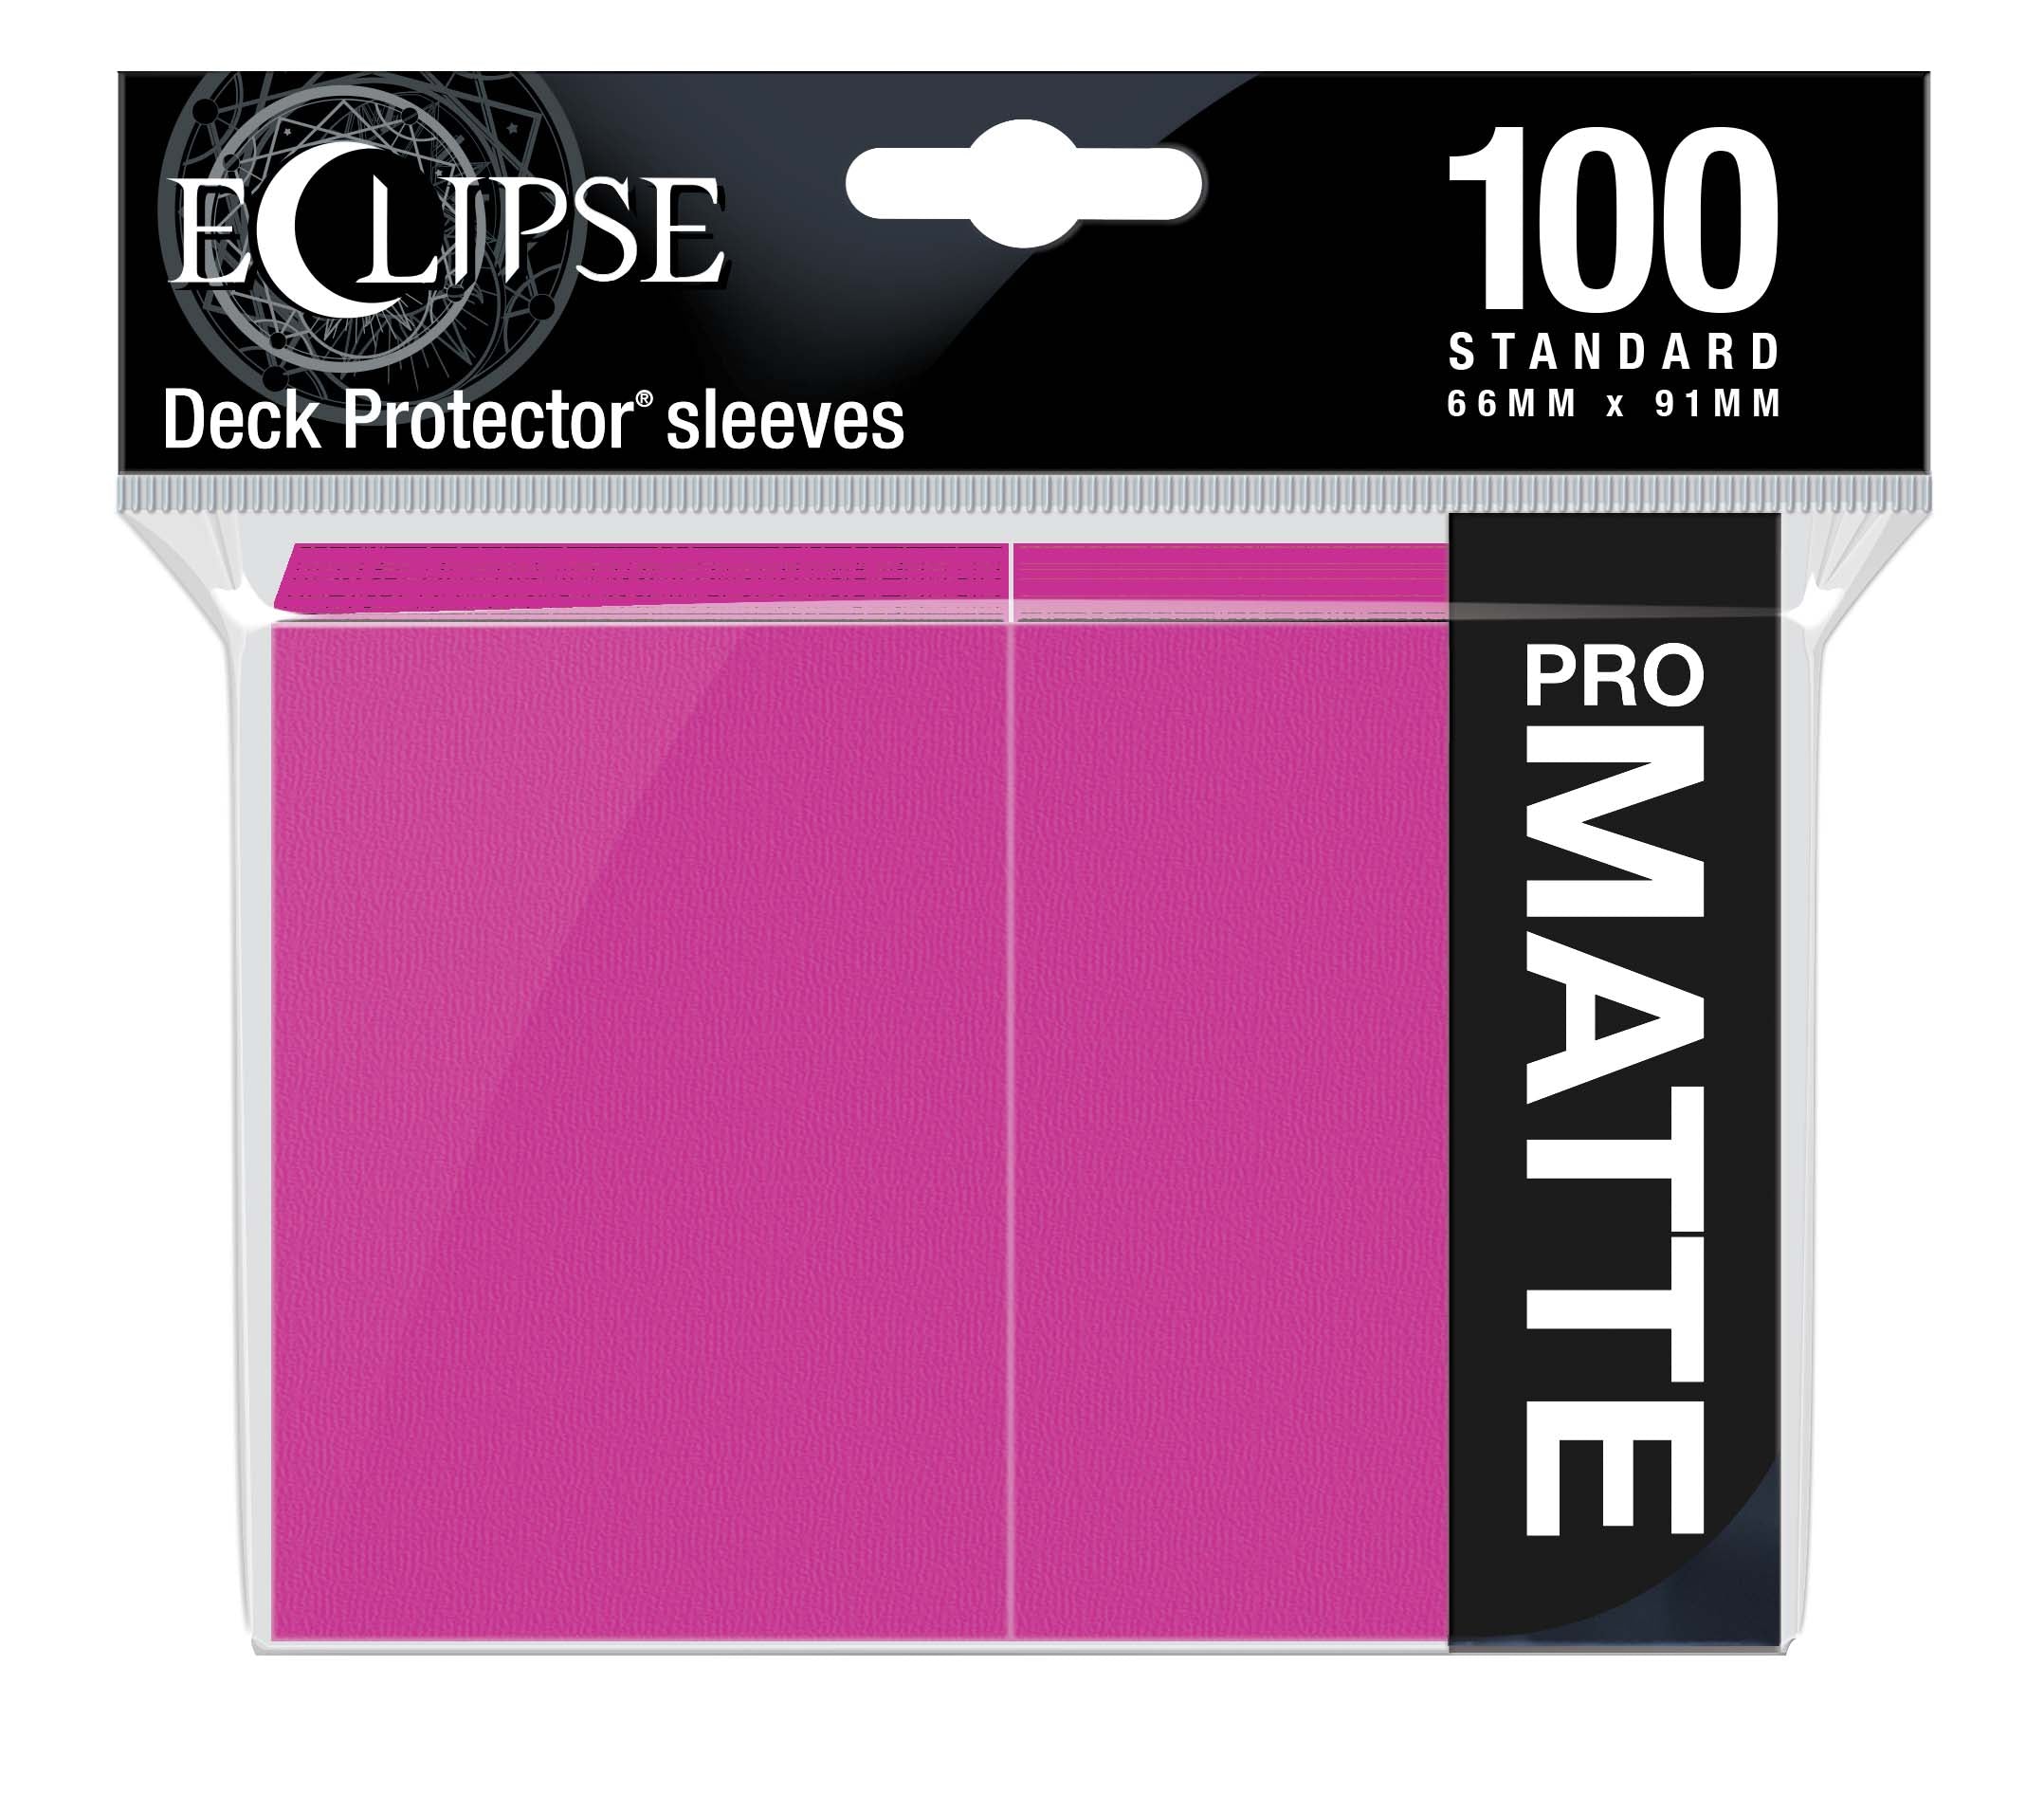 Eclipse Deck Protector Sleeves Matte: Pink | D20 Games